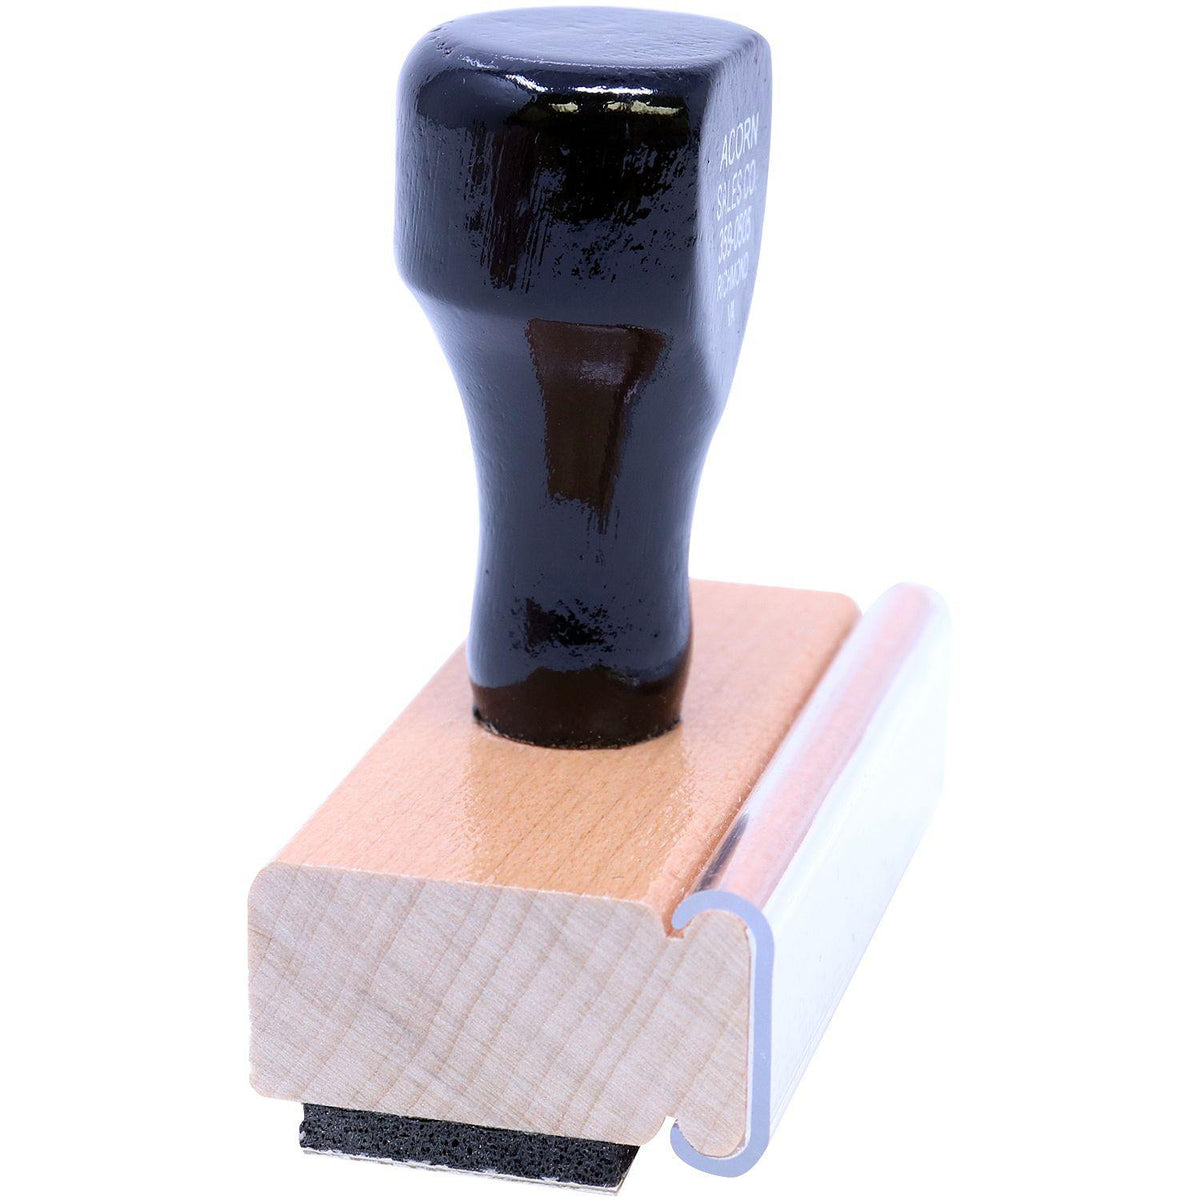 Side View of Super Kid Rubber Stamp at an Angle